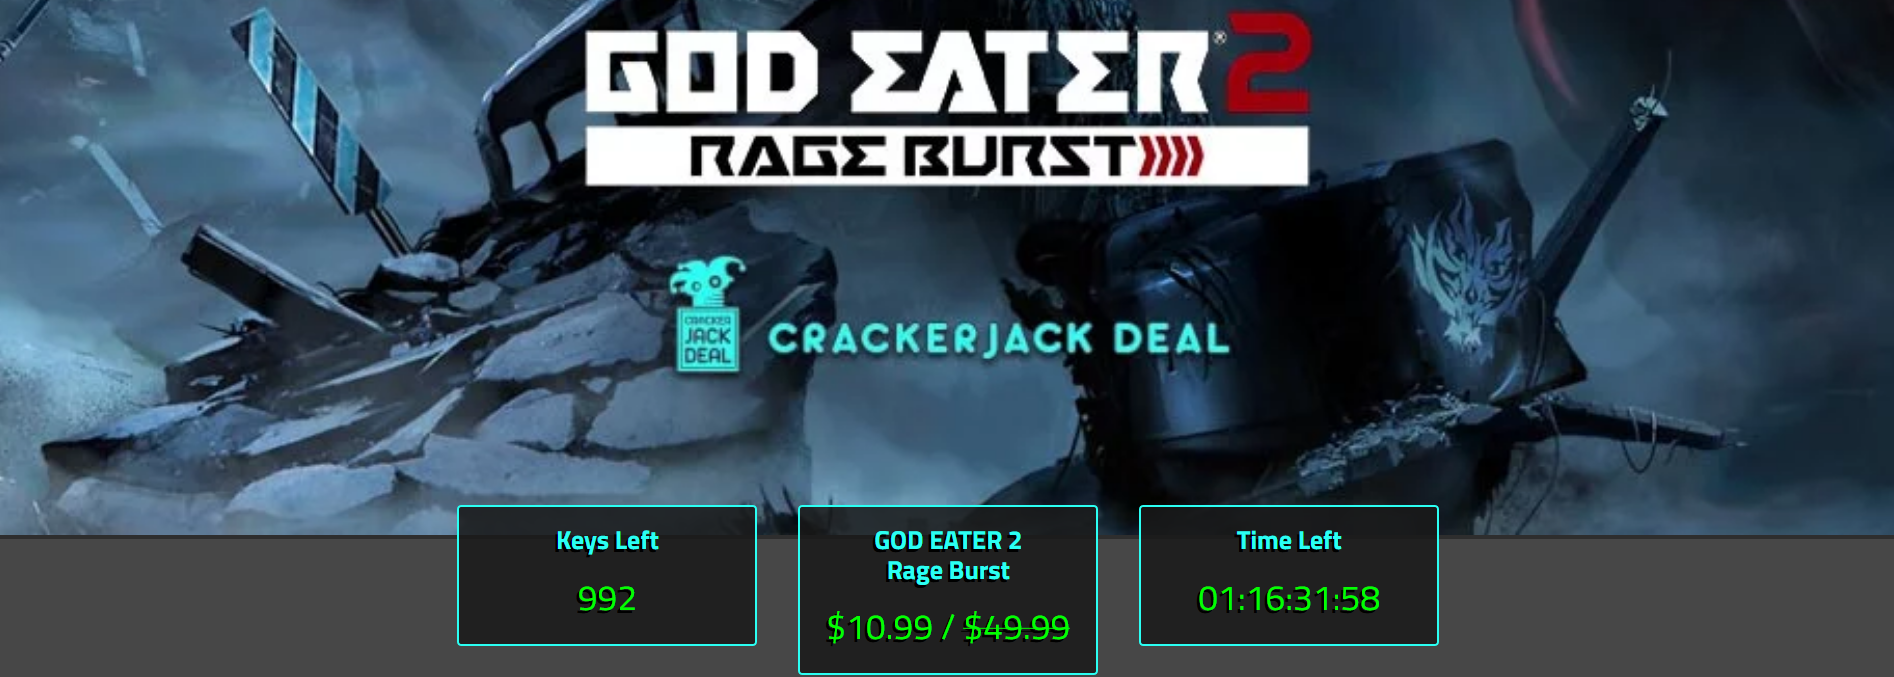 Screenshot_2019-02-27 Attention, it's a crackerjack GOD EATER 2 Rage Burst at a jaw-dropping price .png